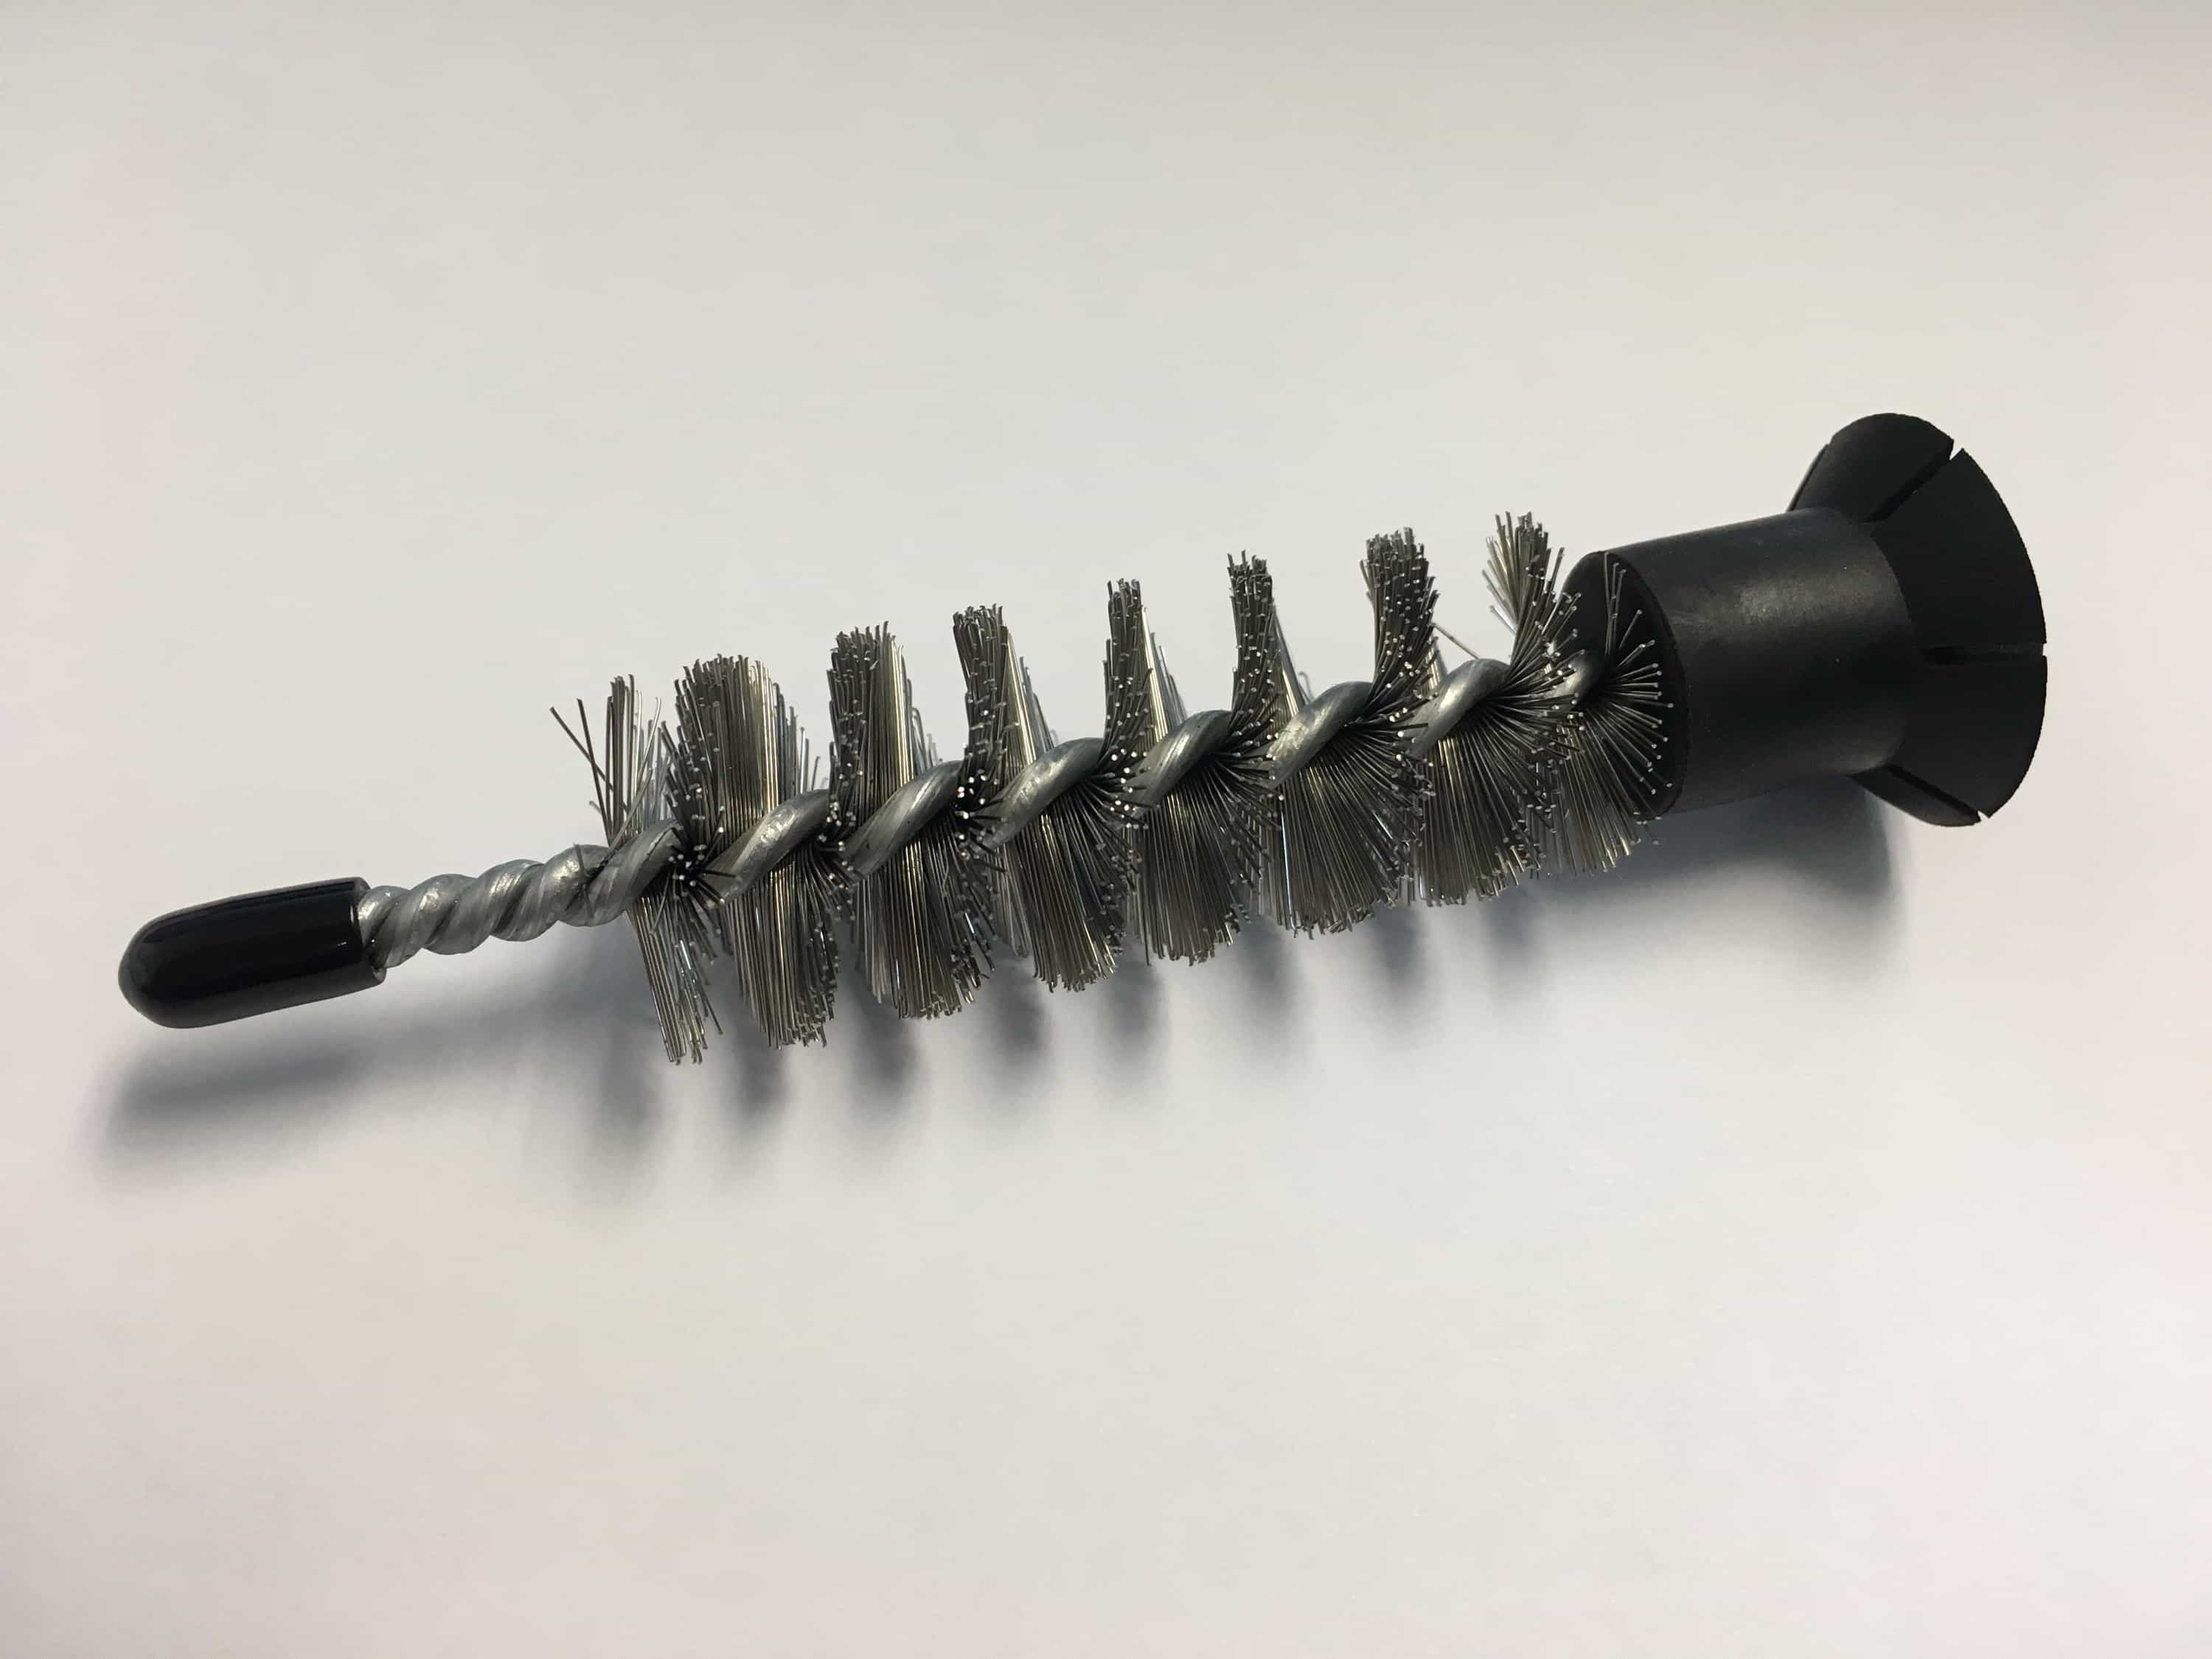 Aexit 30cm Length Punches 10mm Diameter Stainless Steel Wire Tube Cleaning Brush Pin Punches 10 Pcs 